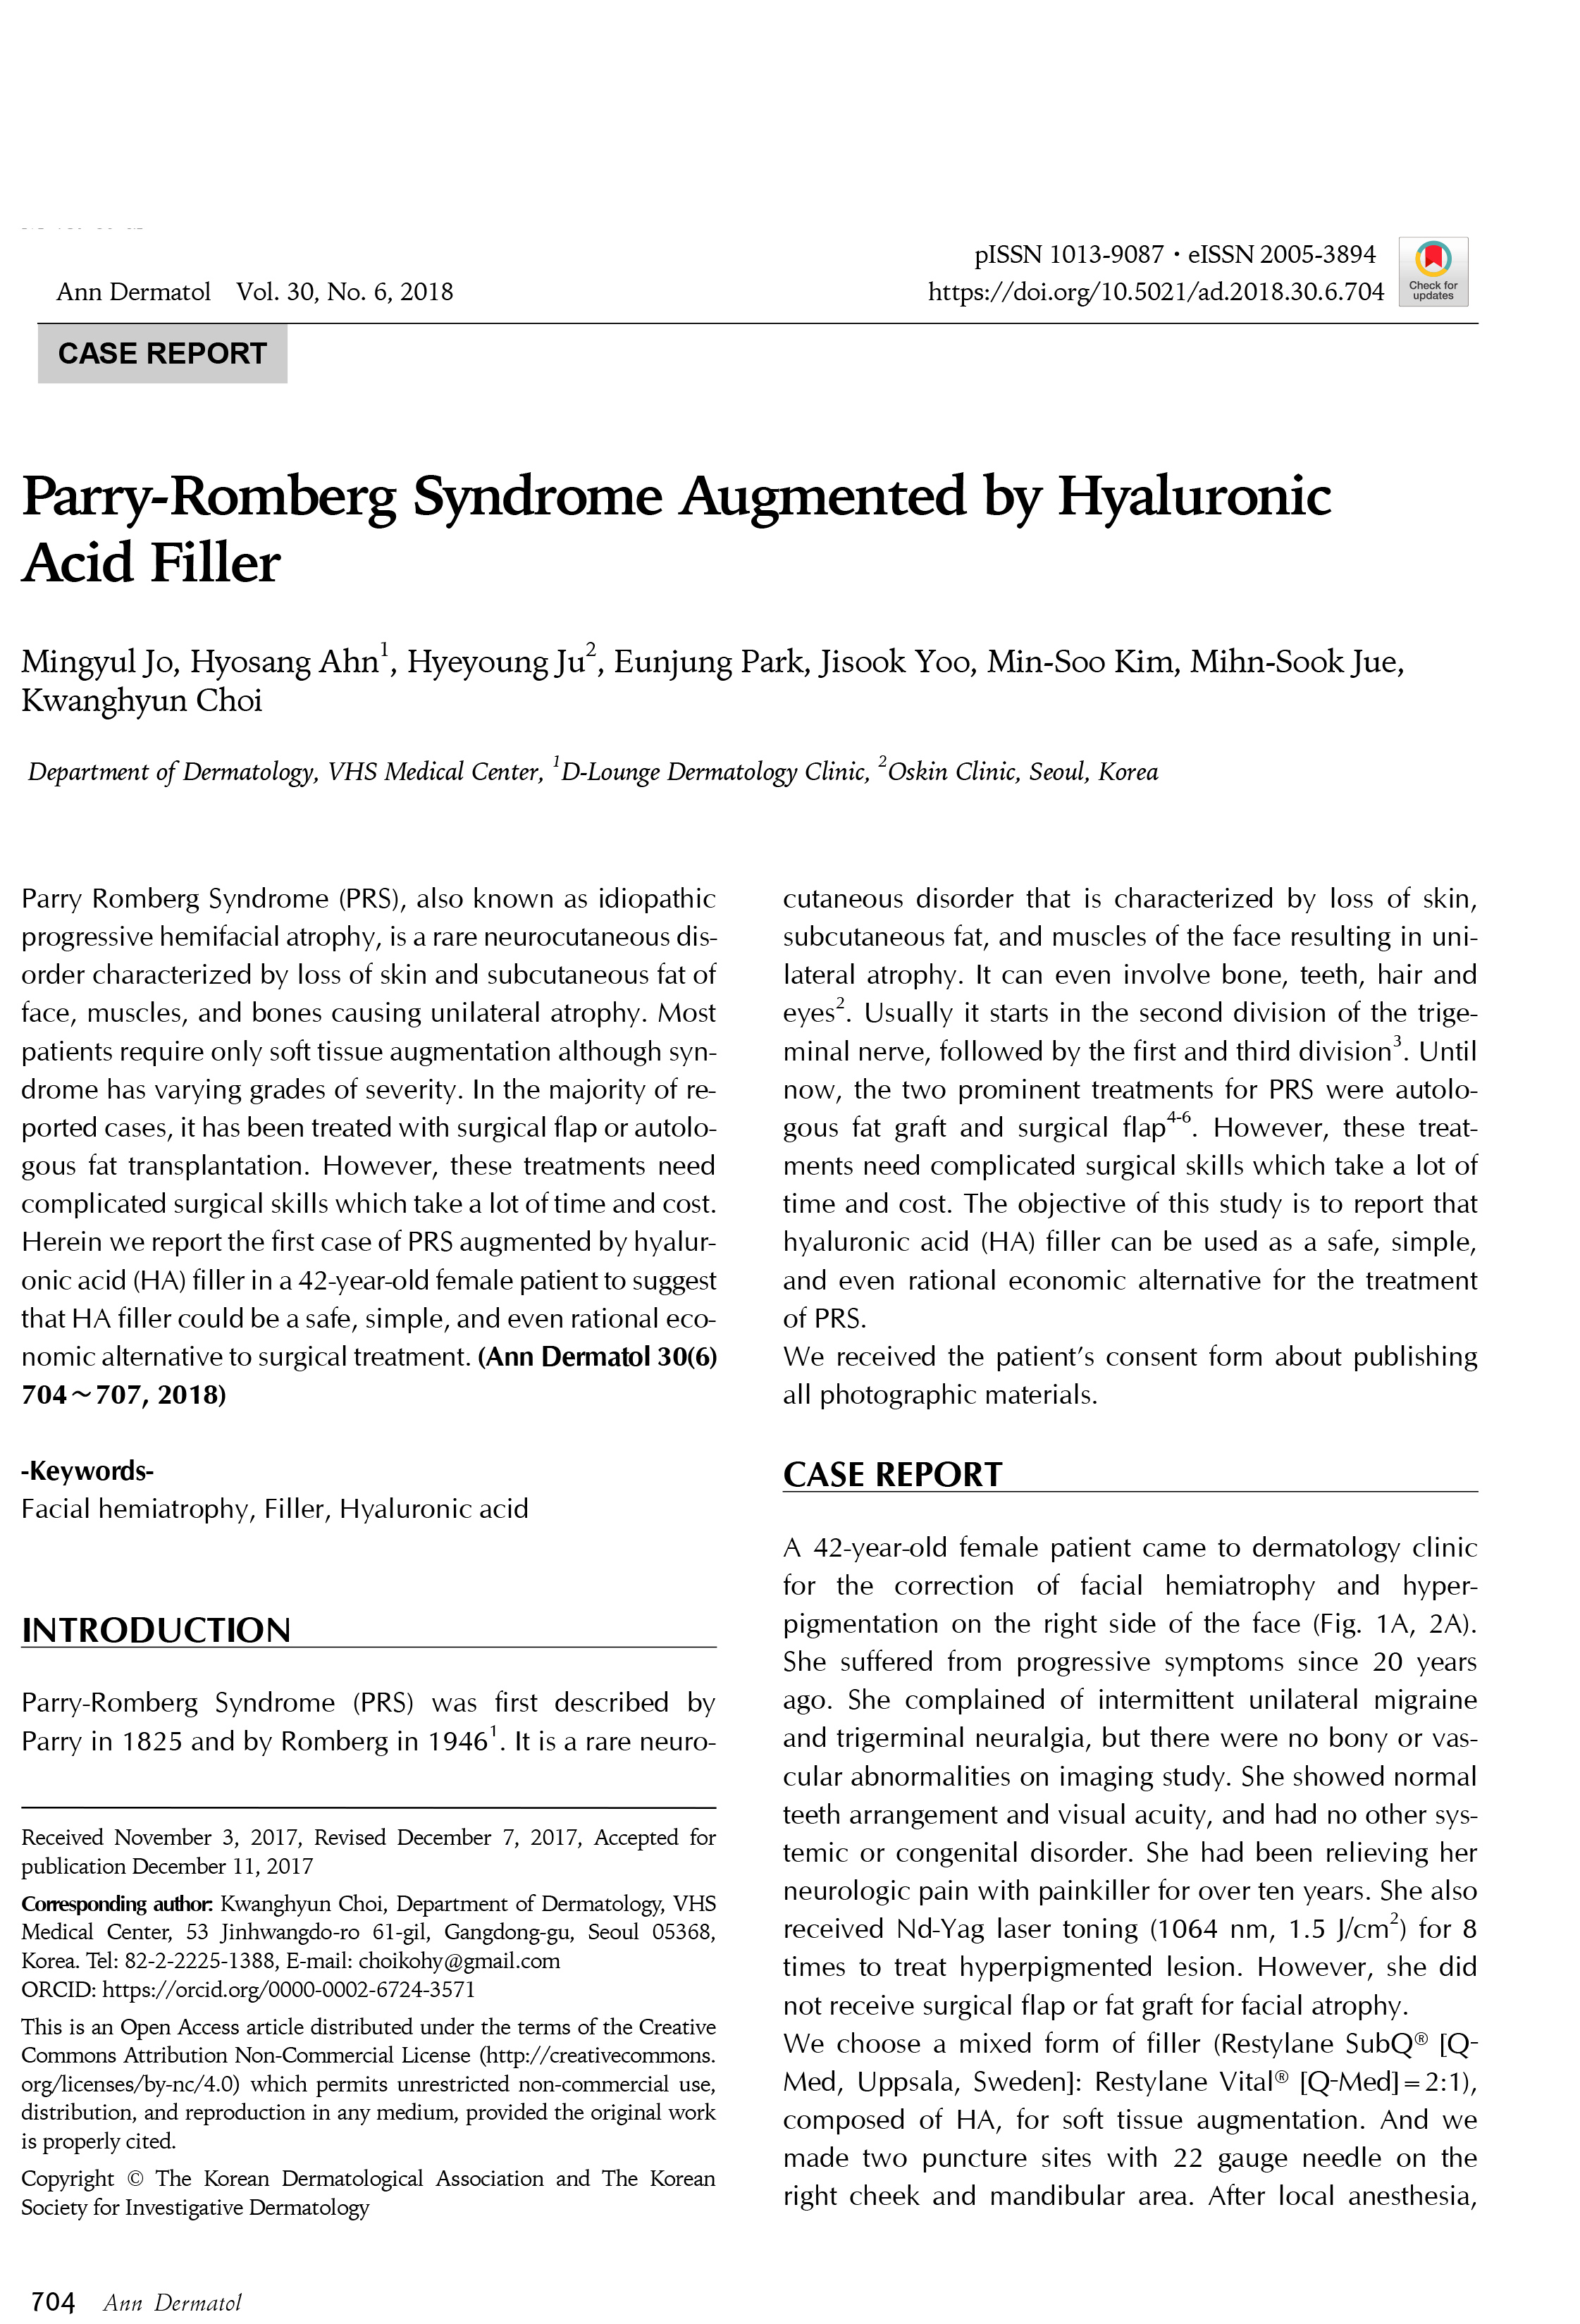 Parry-Romberg_Syndrome_Augmented_by_Hyaluronic_Aci-1.jpg